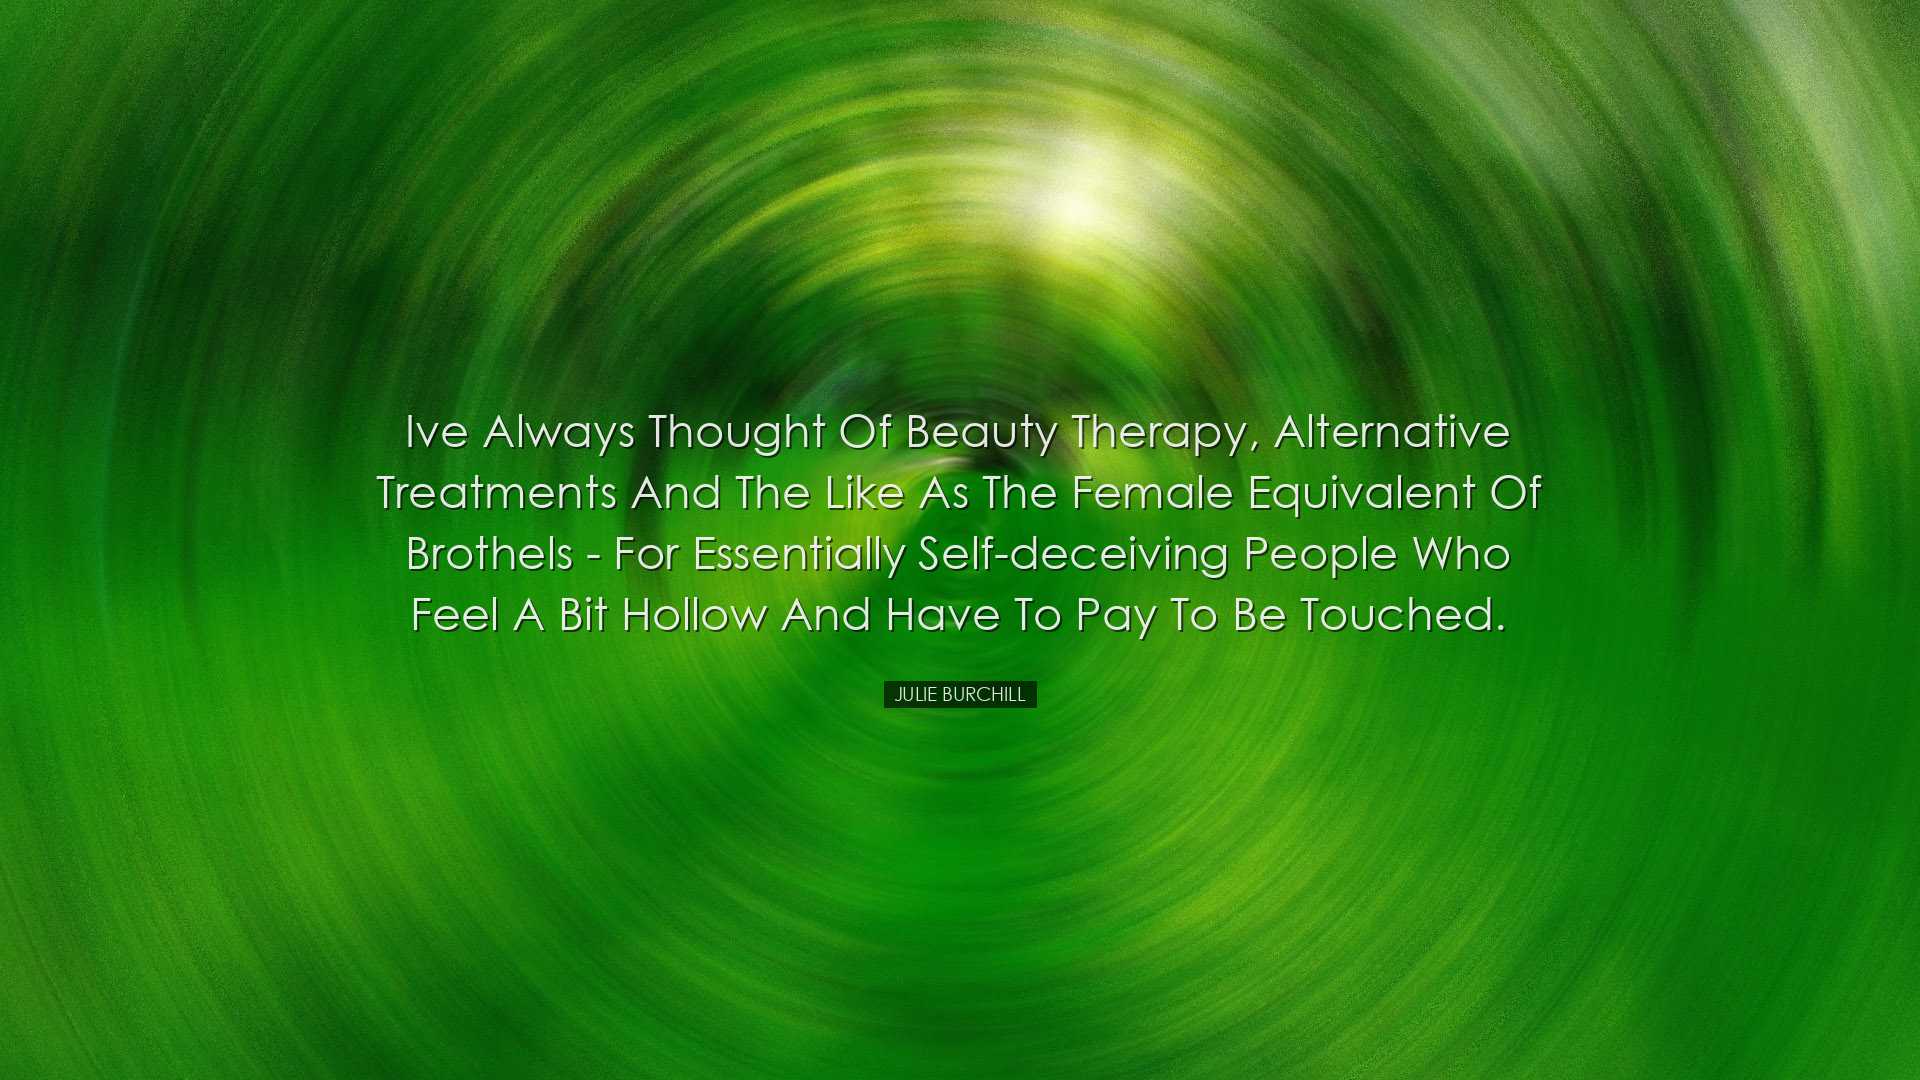 Ive always thought of beauty therapy, alternative treatments and t